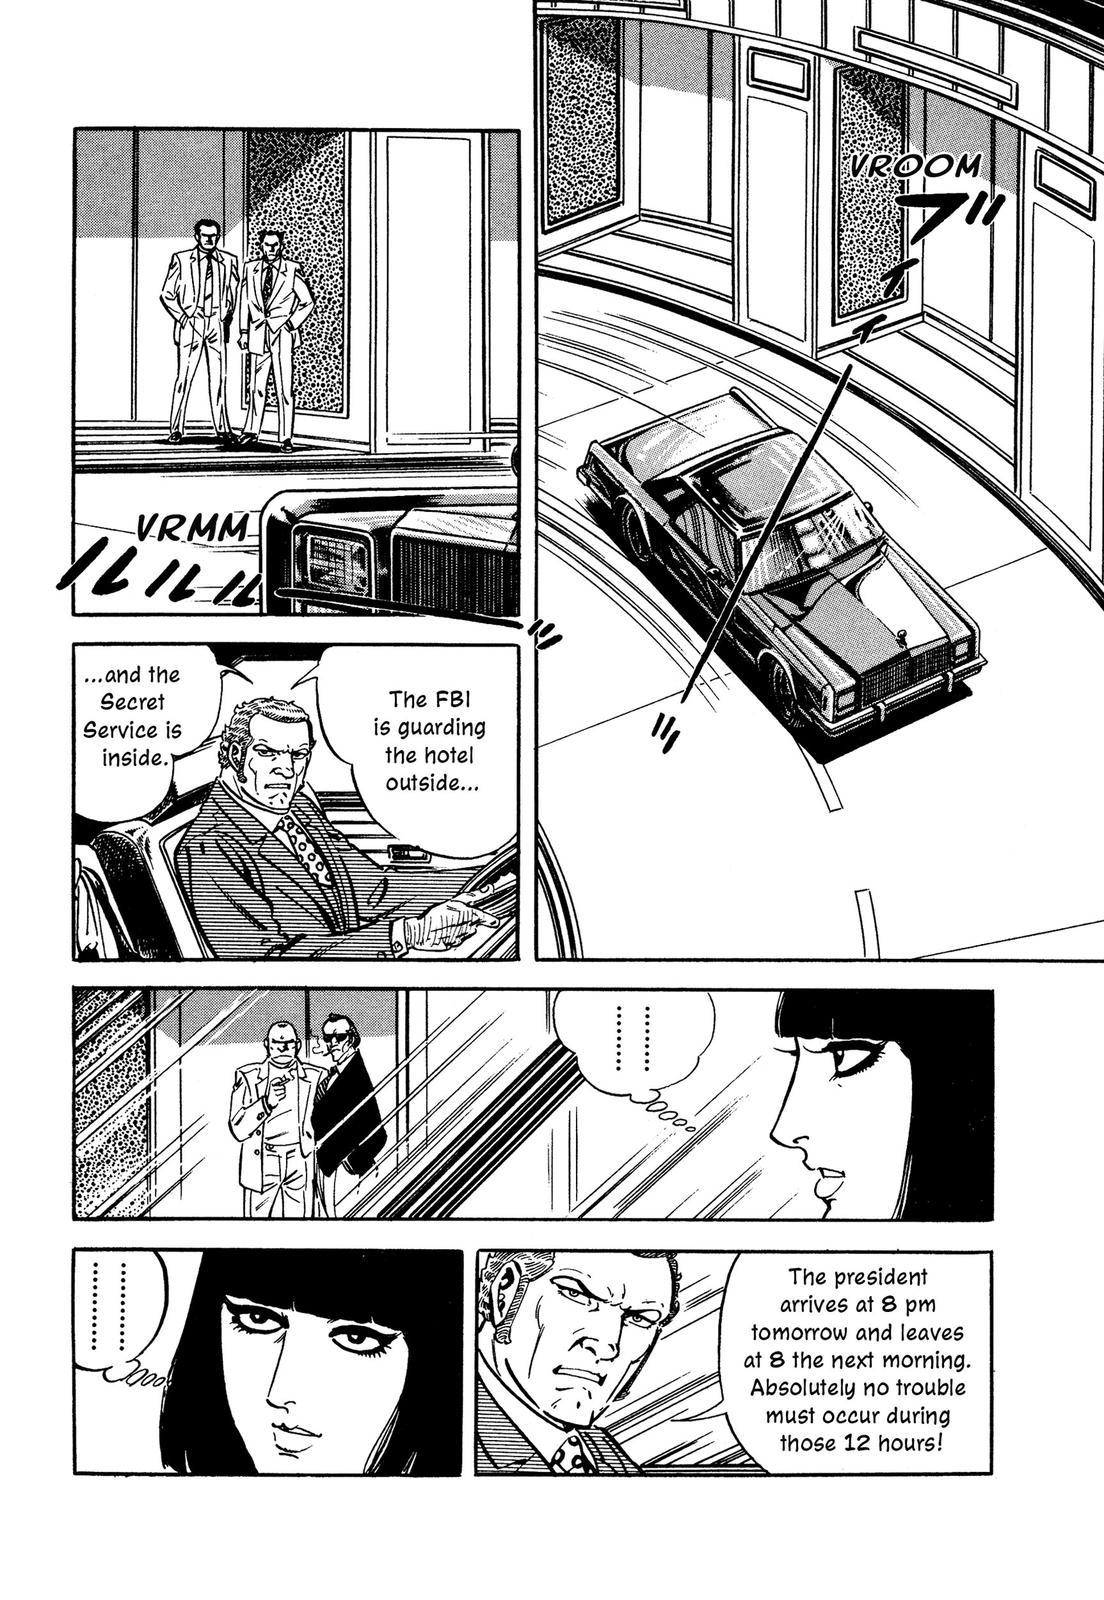 Doll: The Hotel Detective Vol. 1 Ch. 1 Before the President's Arrival